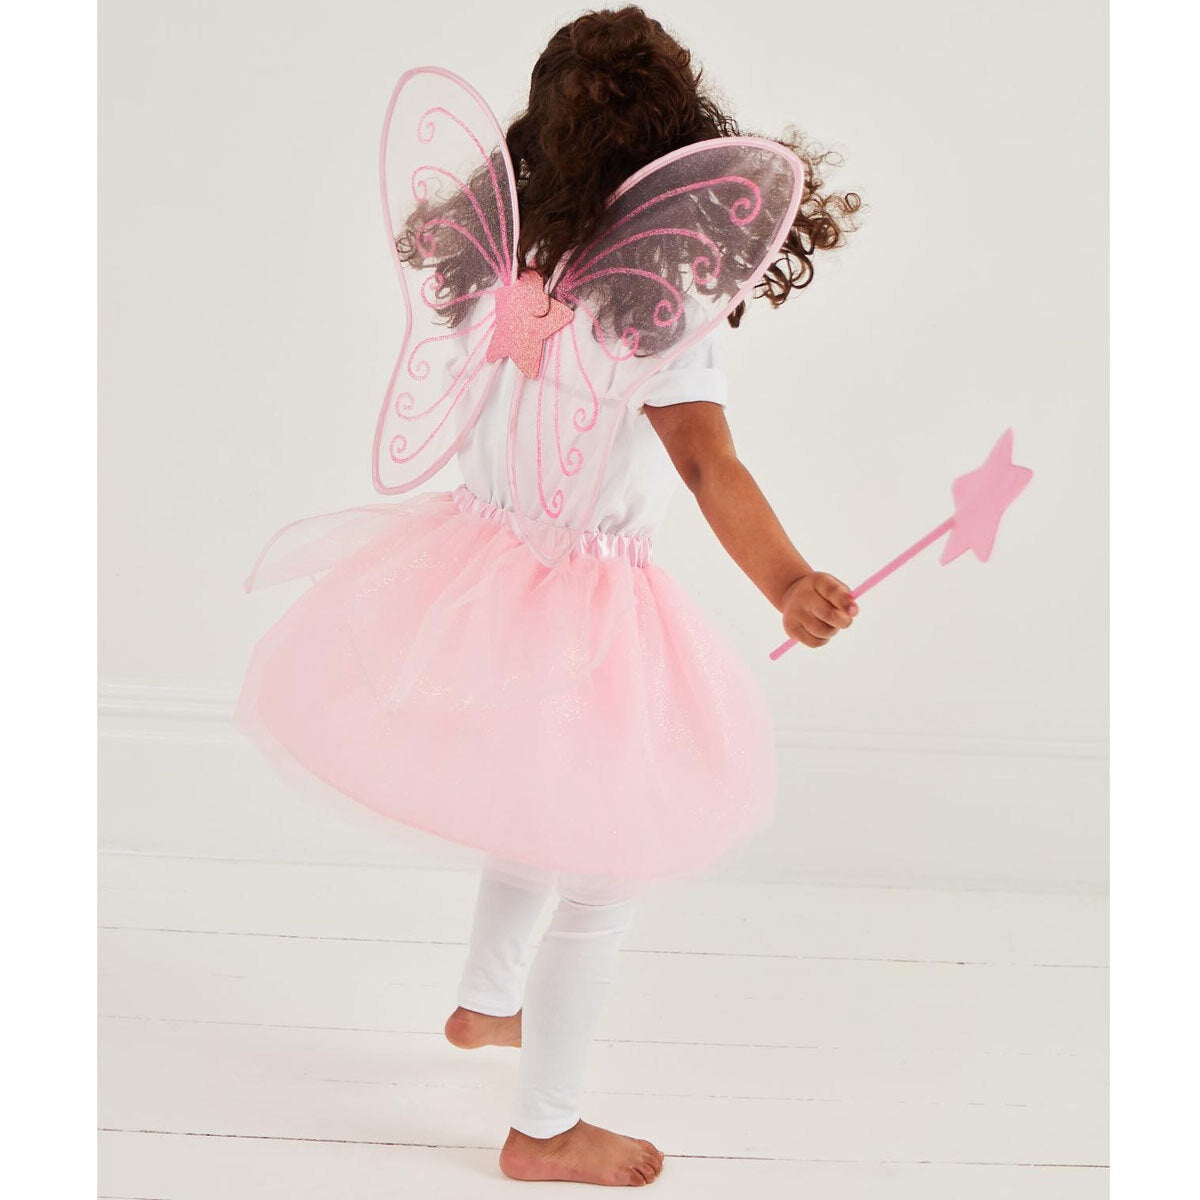 Early Learning Centre Fairy Costume